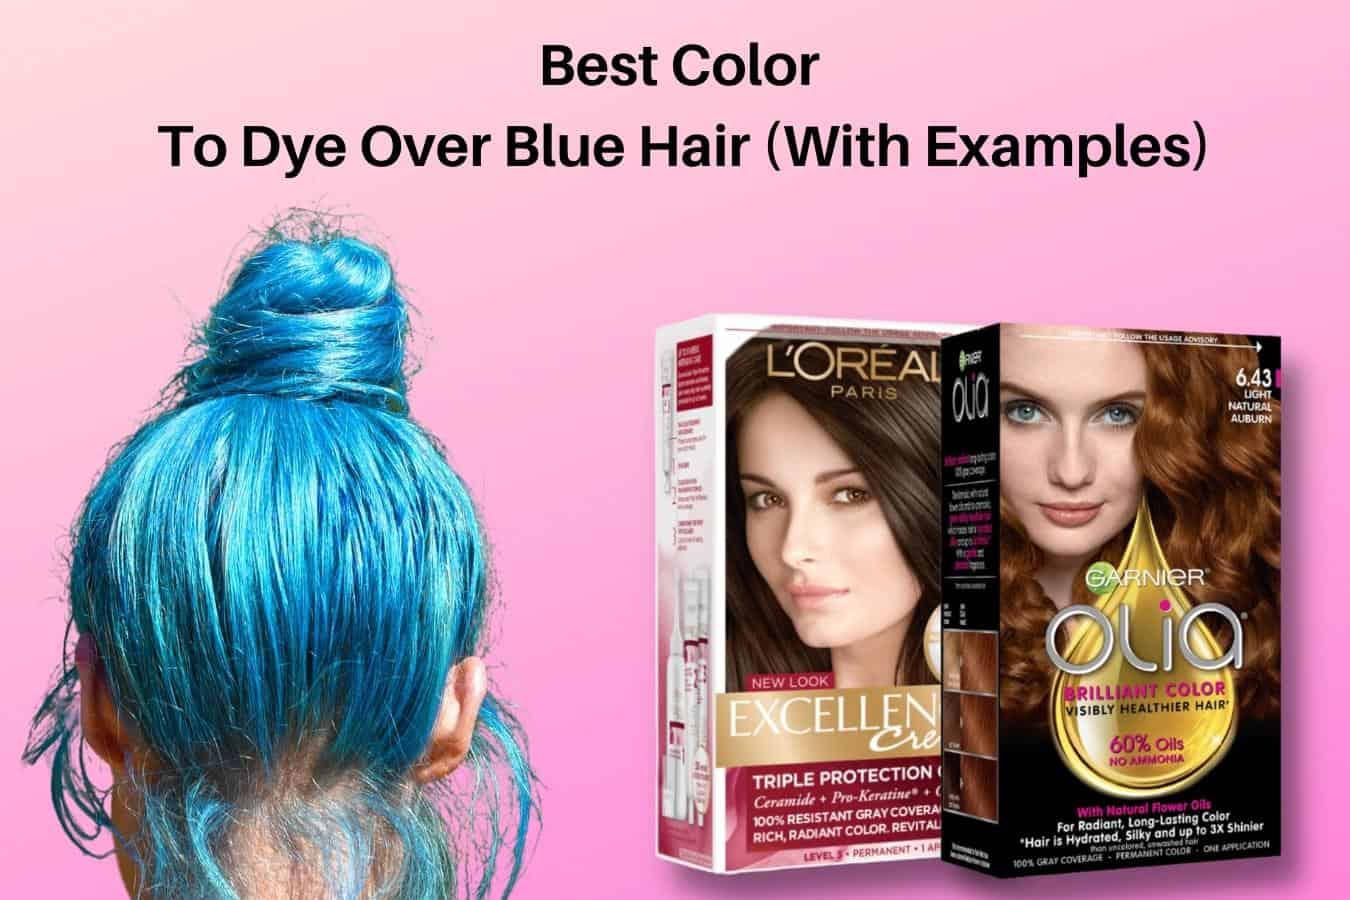 Best Color To Dye Over Blue Hair